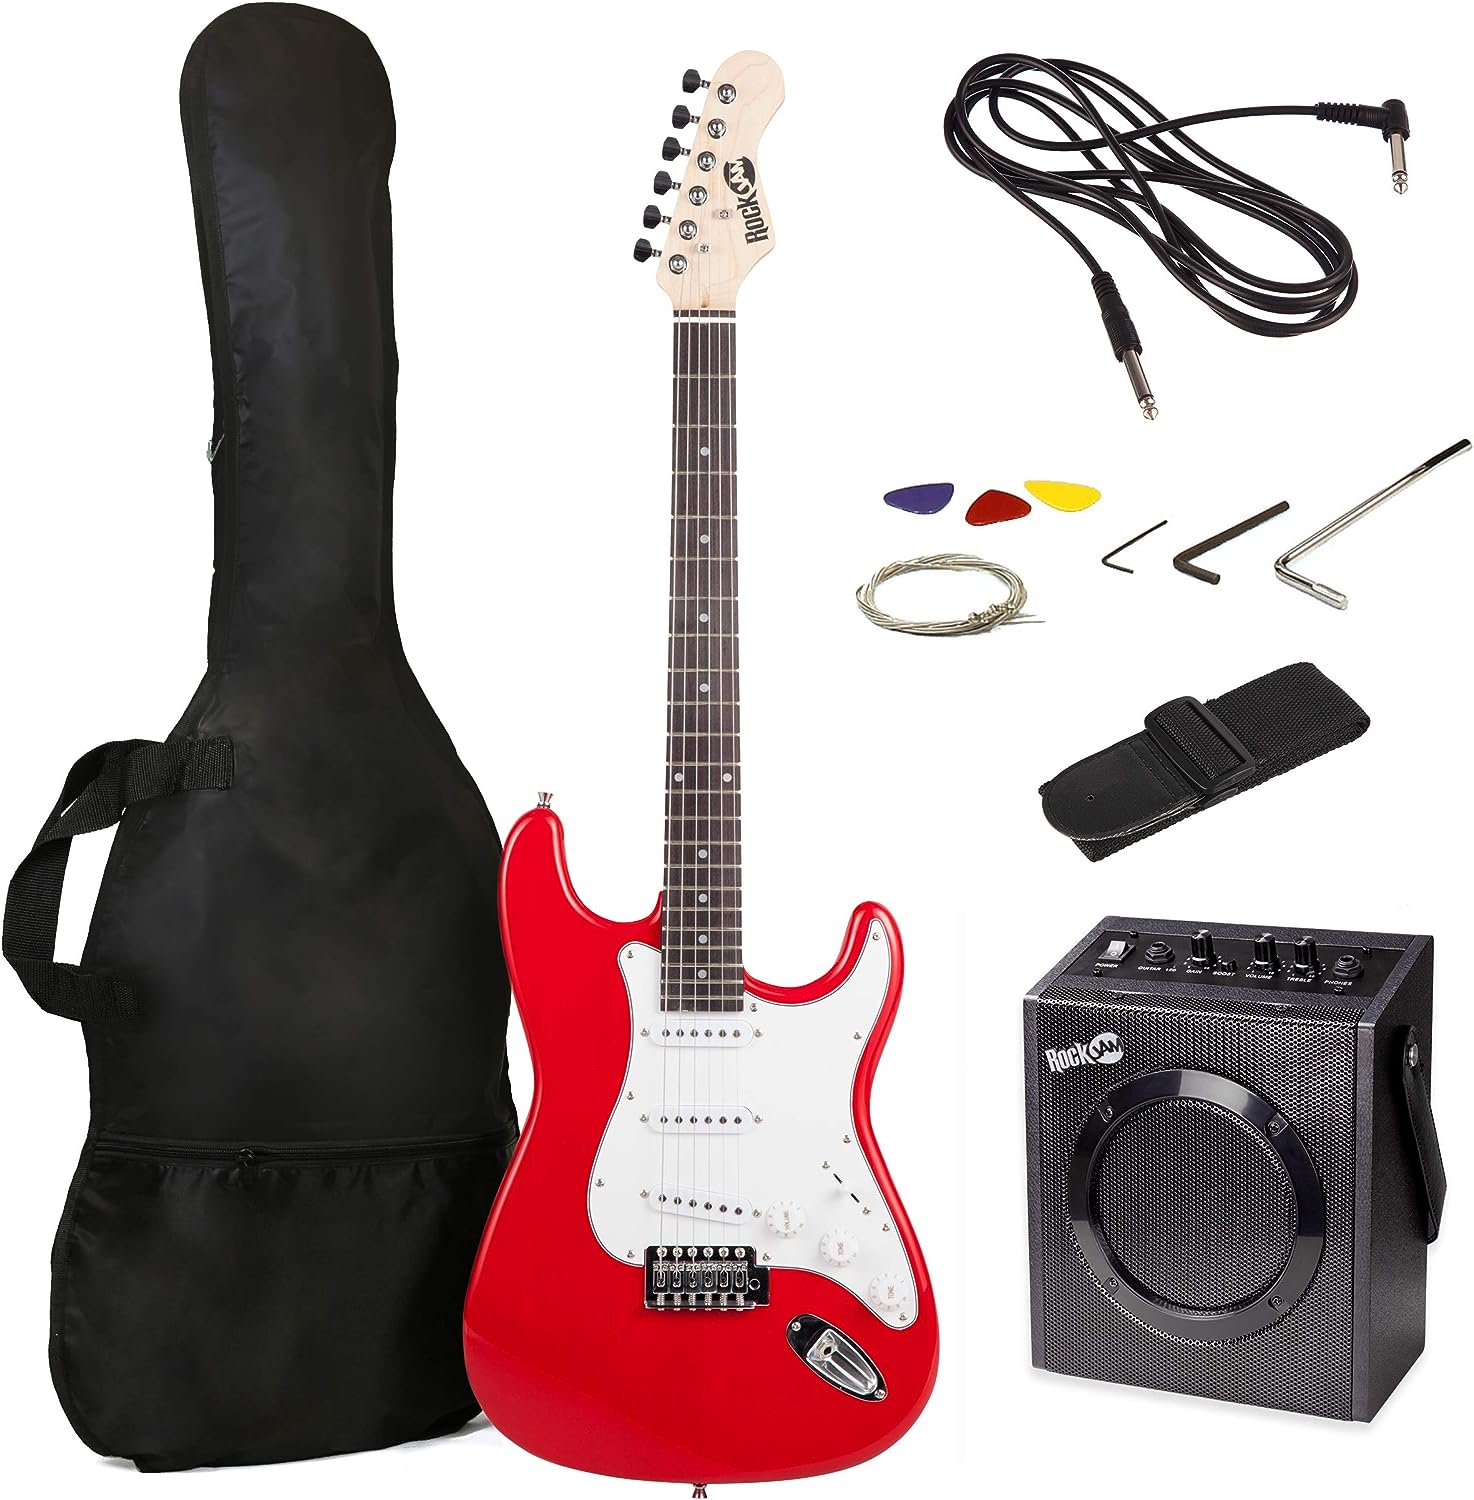 RockJam Electric Guitar Superkit on a white background